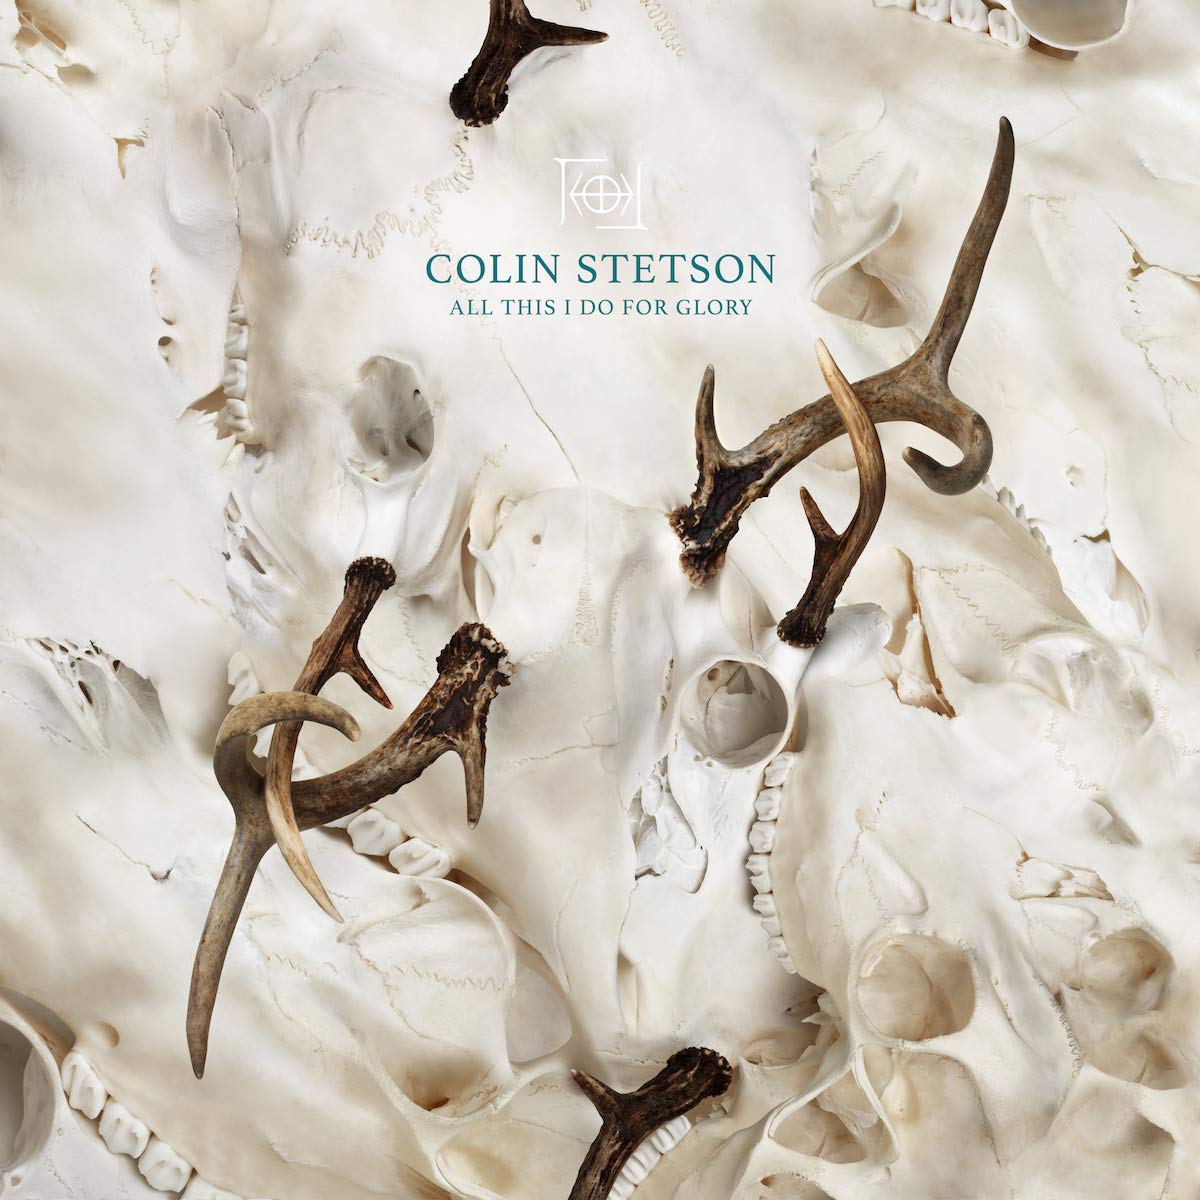 Stetson, Colin/All This I Do For Glory [CD]